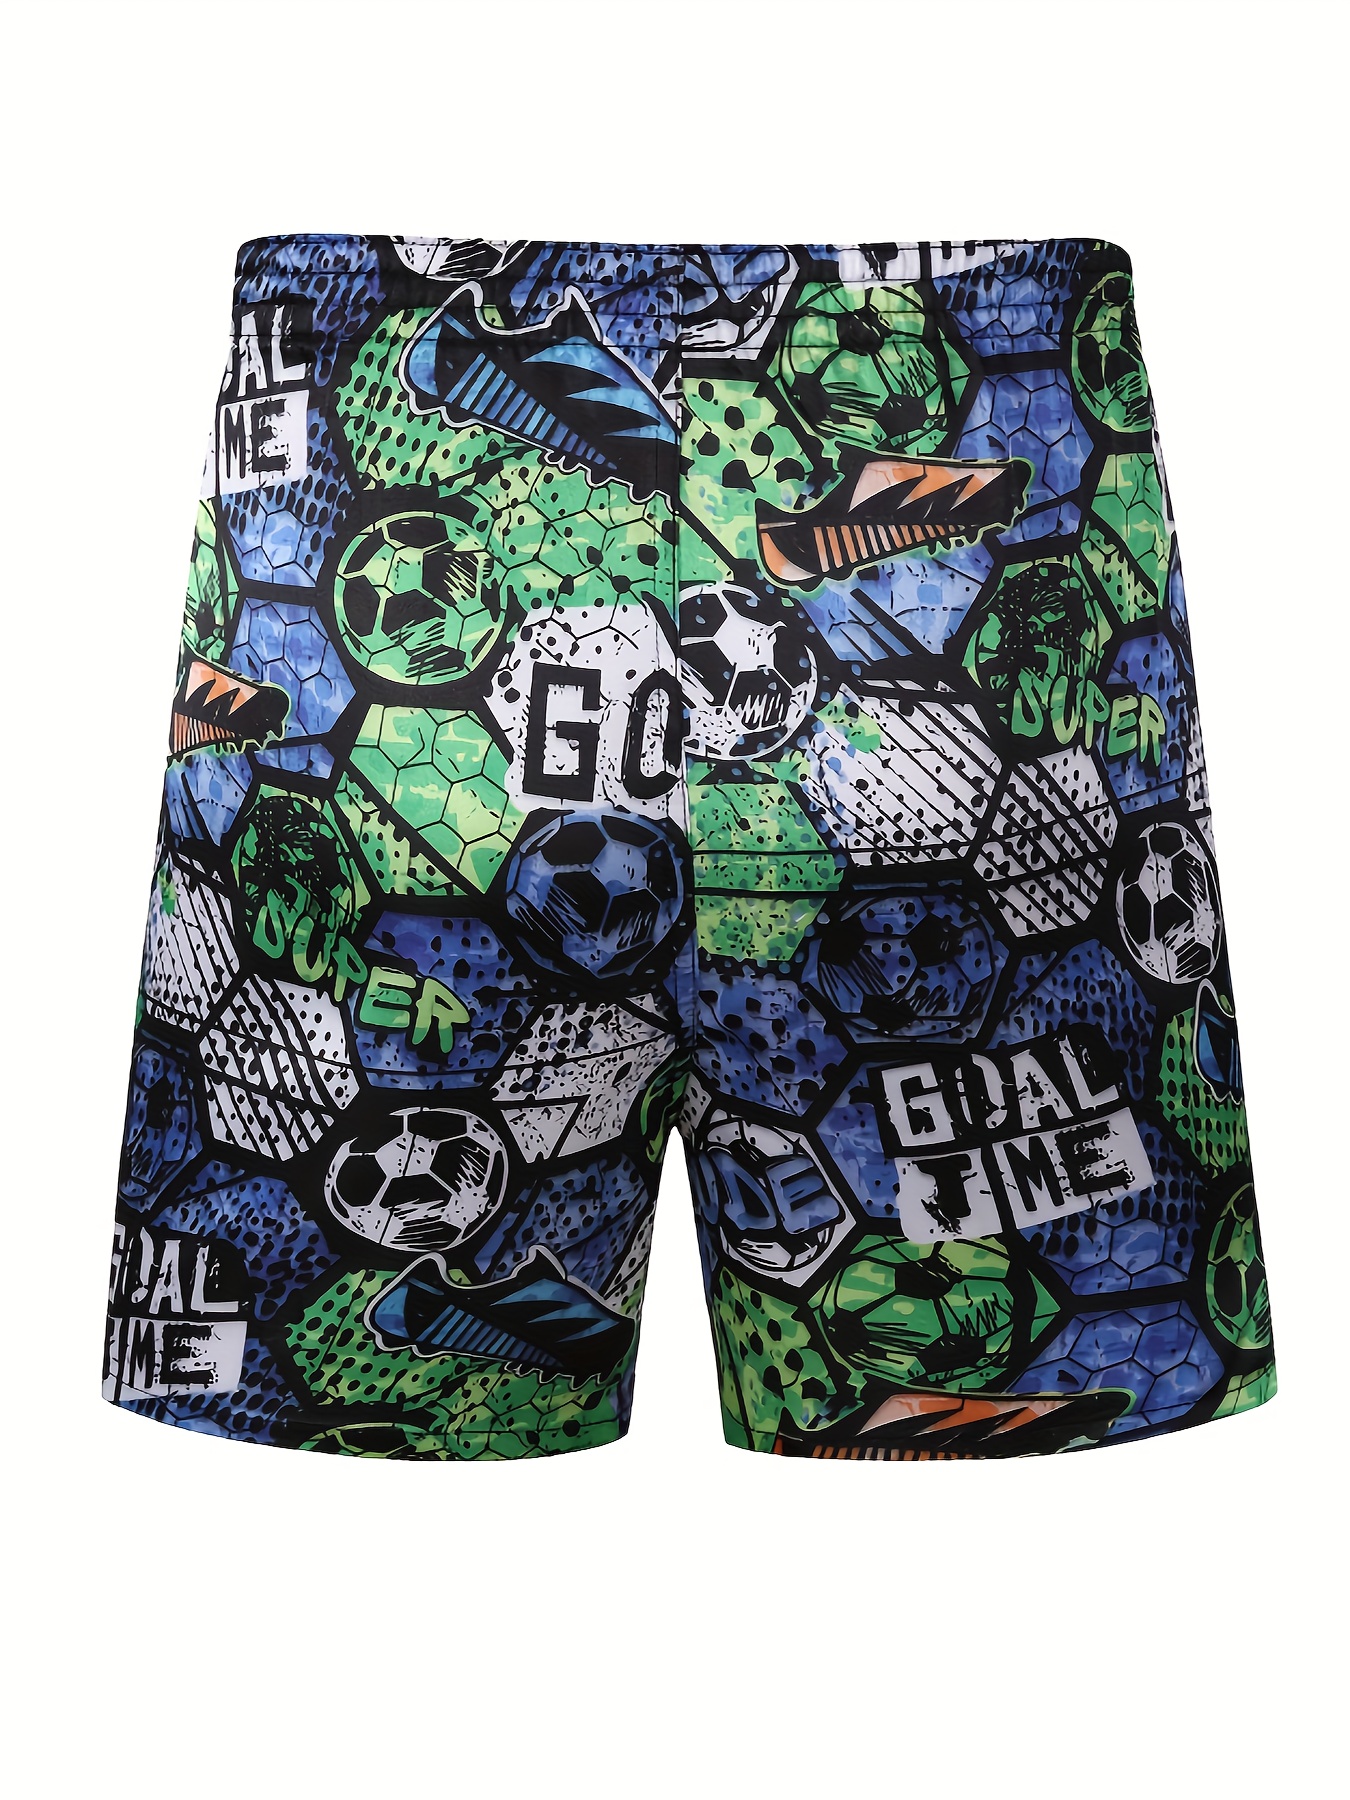 Sagester Padded Shorts 412, € 70,00